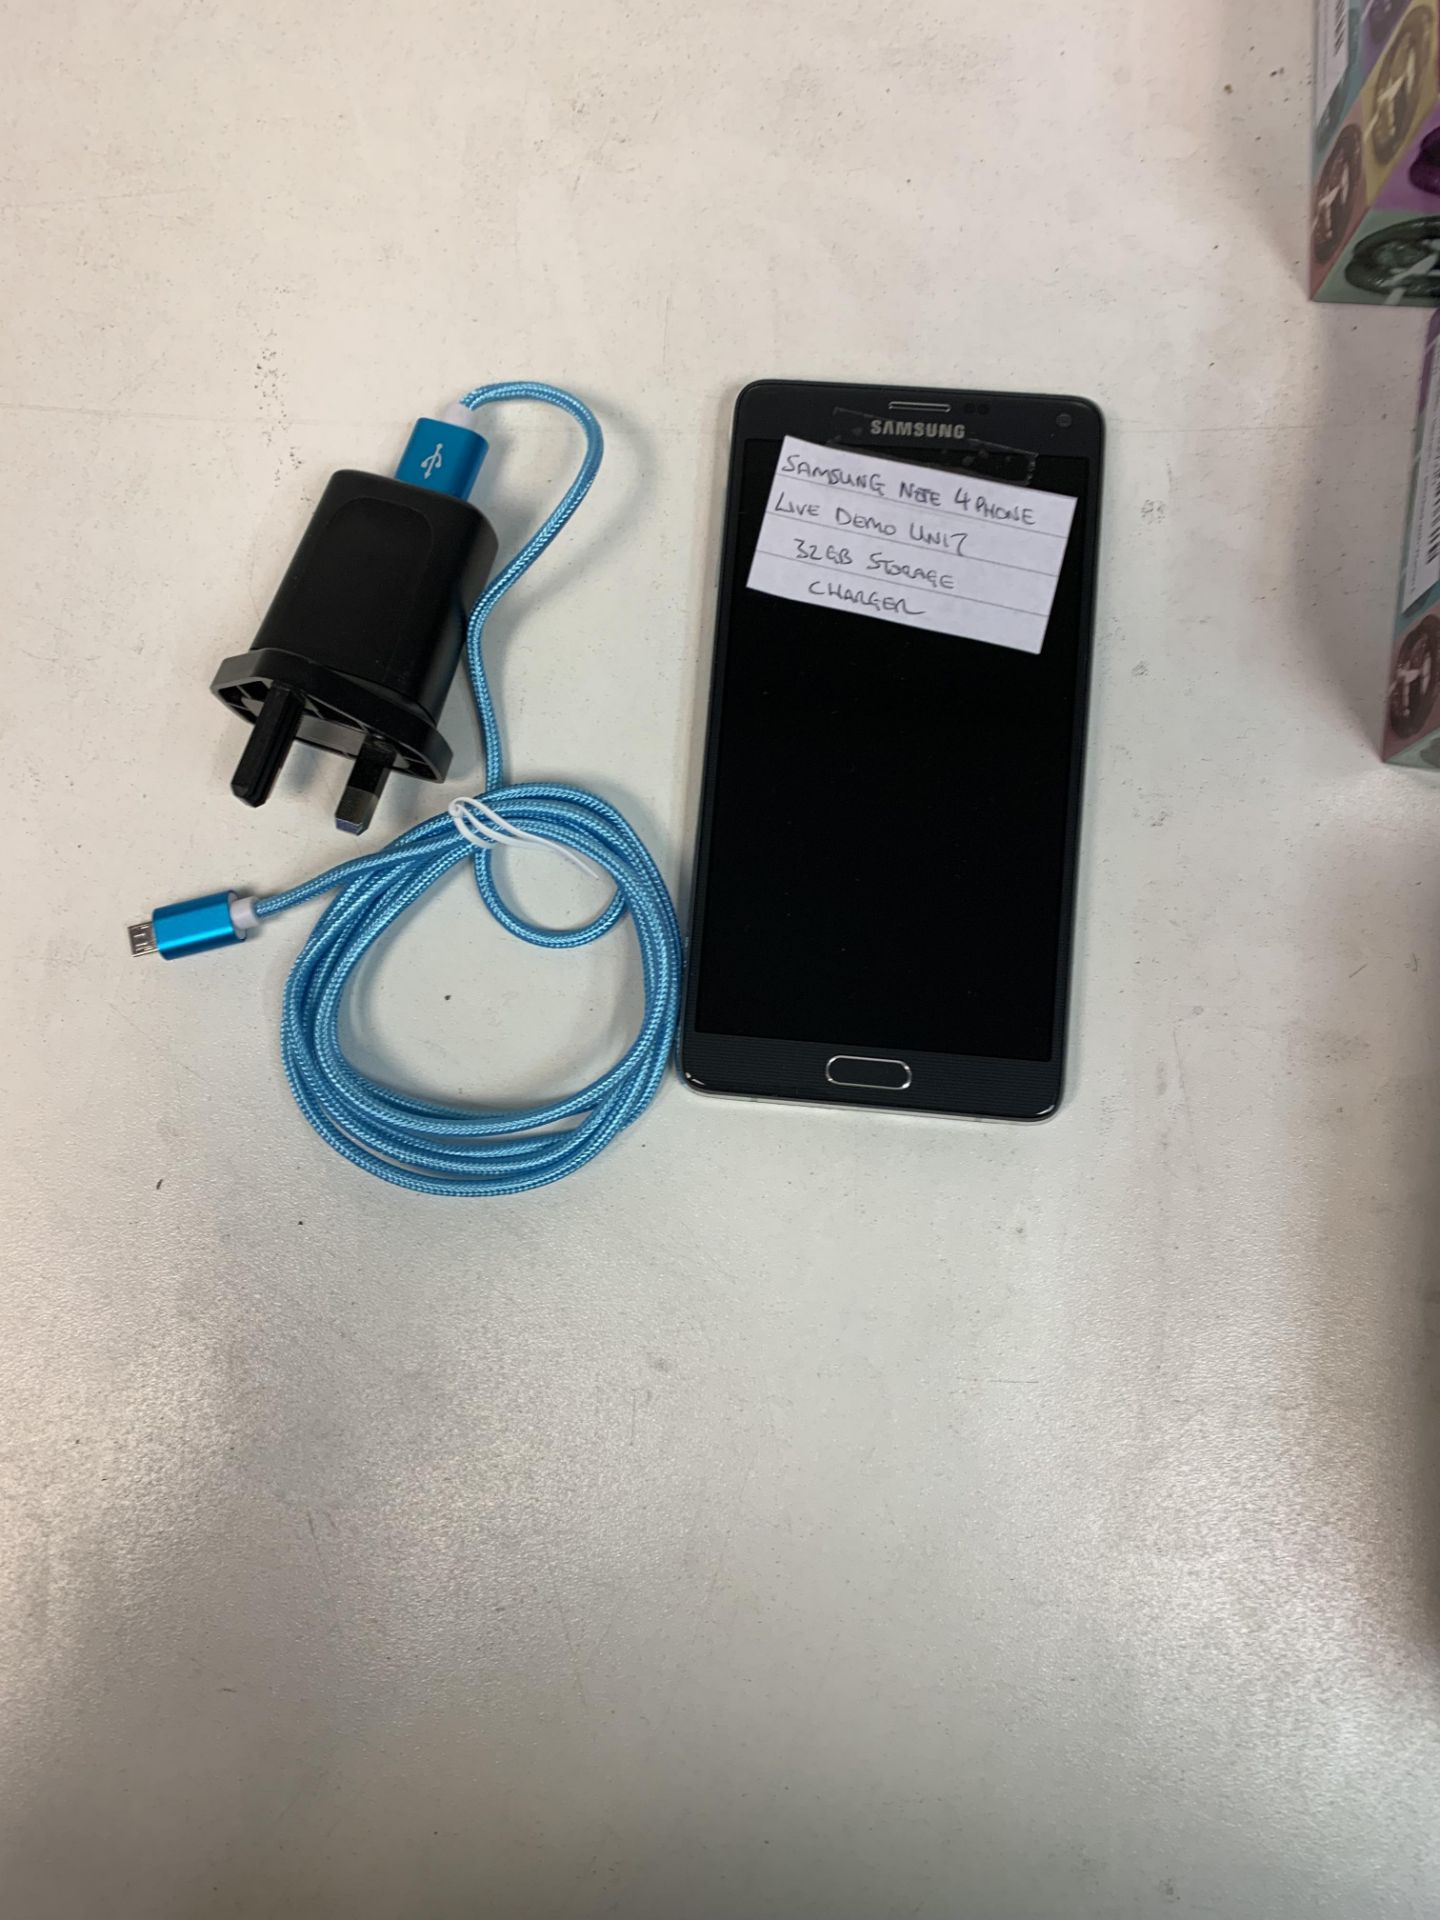 SAMSUNG NOTE 4 PHONE, LIVE DEMO UNIT 32GB WITH CHARGER